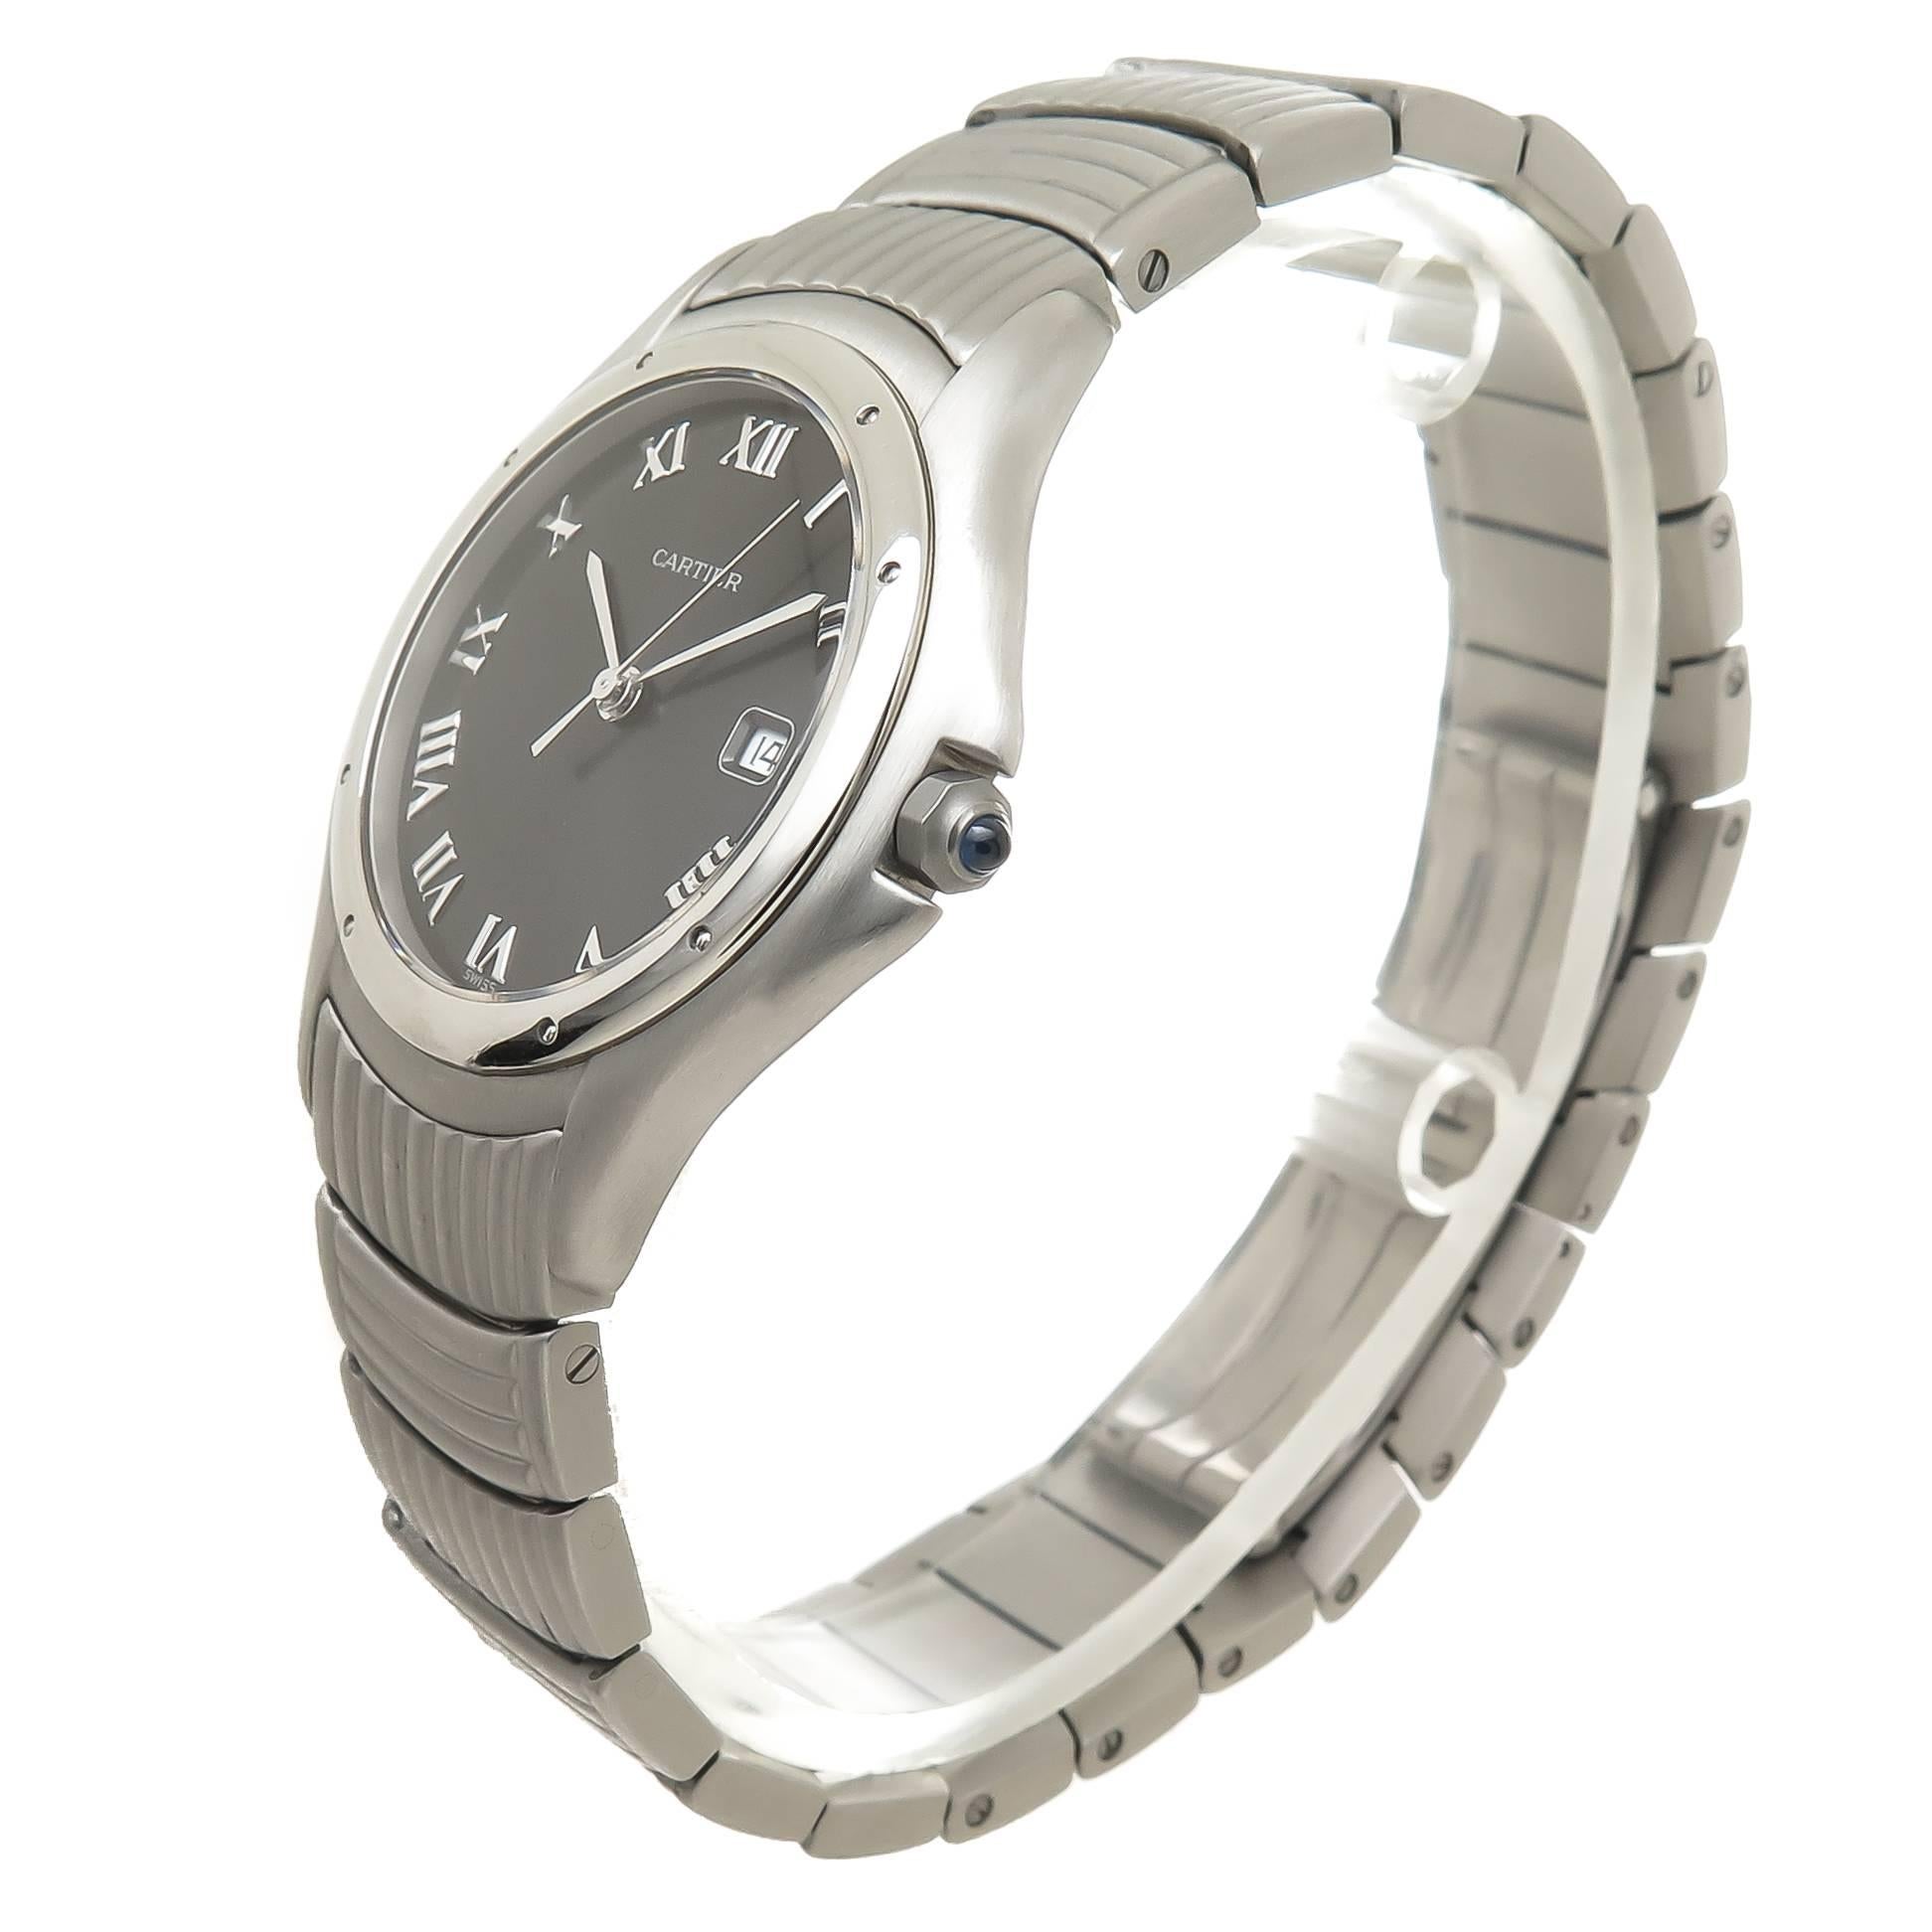 Circa 2010 Cartier Cougar Wrist Watch, 33 MM Diameter Stainless Steel case, Quartz Movement, Charcoal Gray Dial with Raised Markers, Sweep seconds hand, calendar window at the 3 and a Sapphire Crown. 5/8 inch wide Stainless steel bracelet with